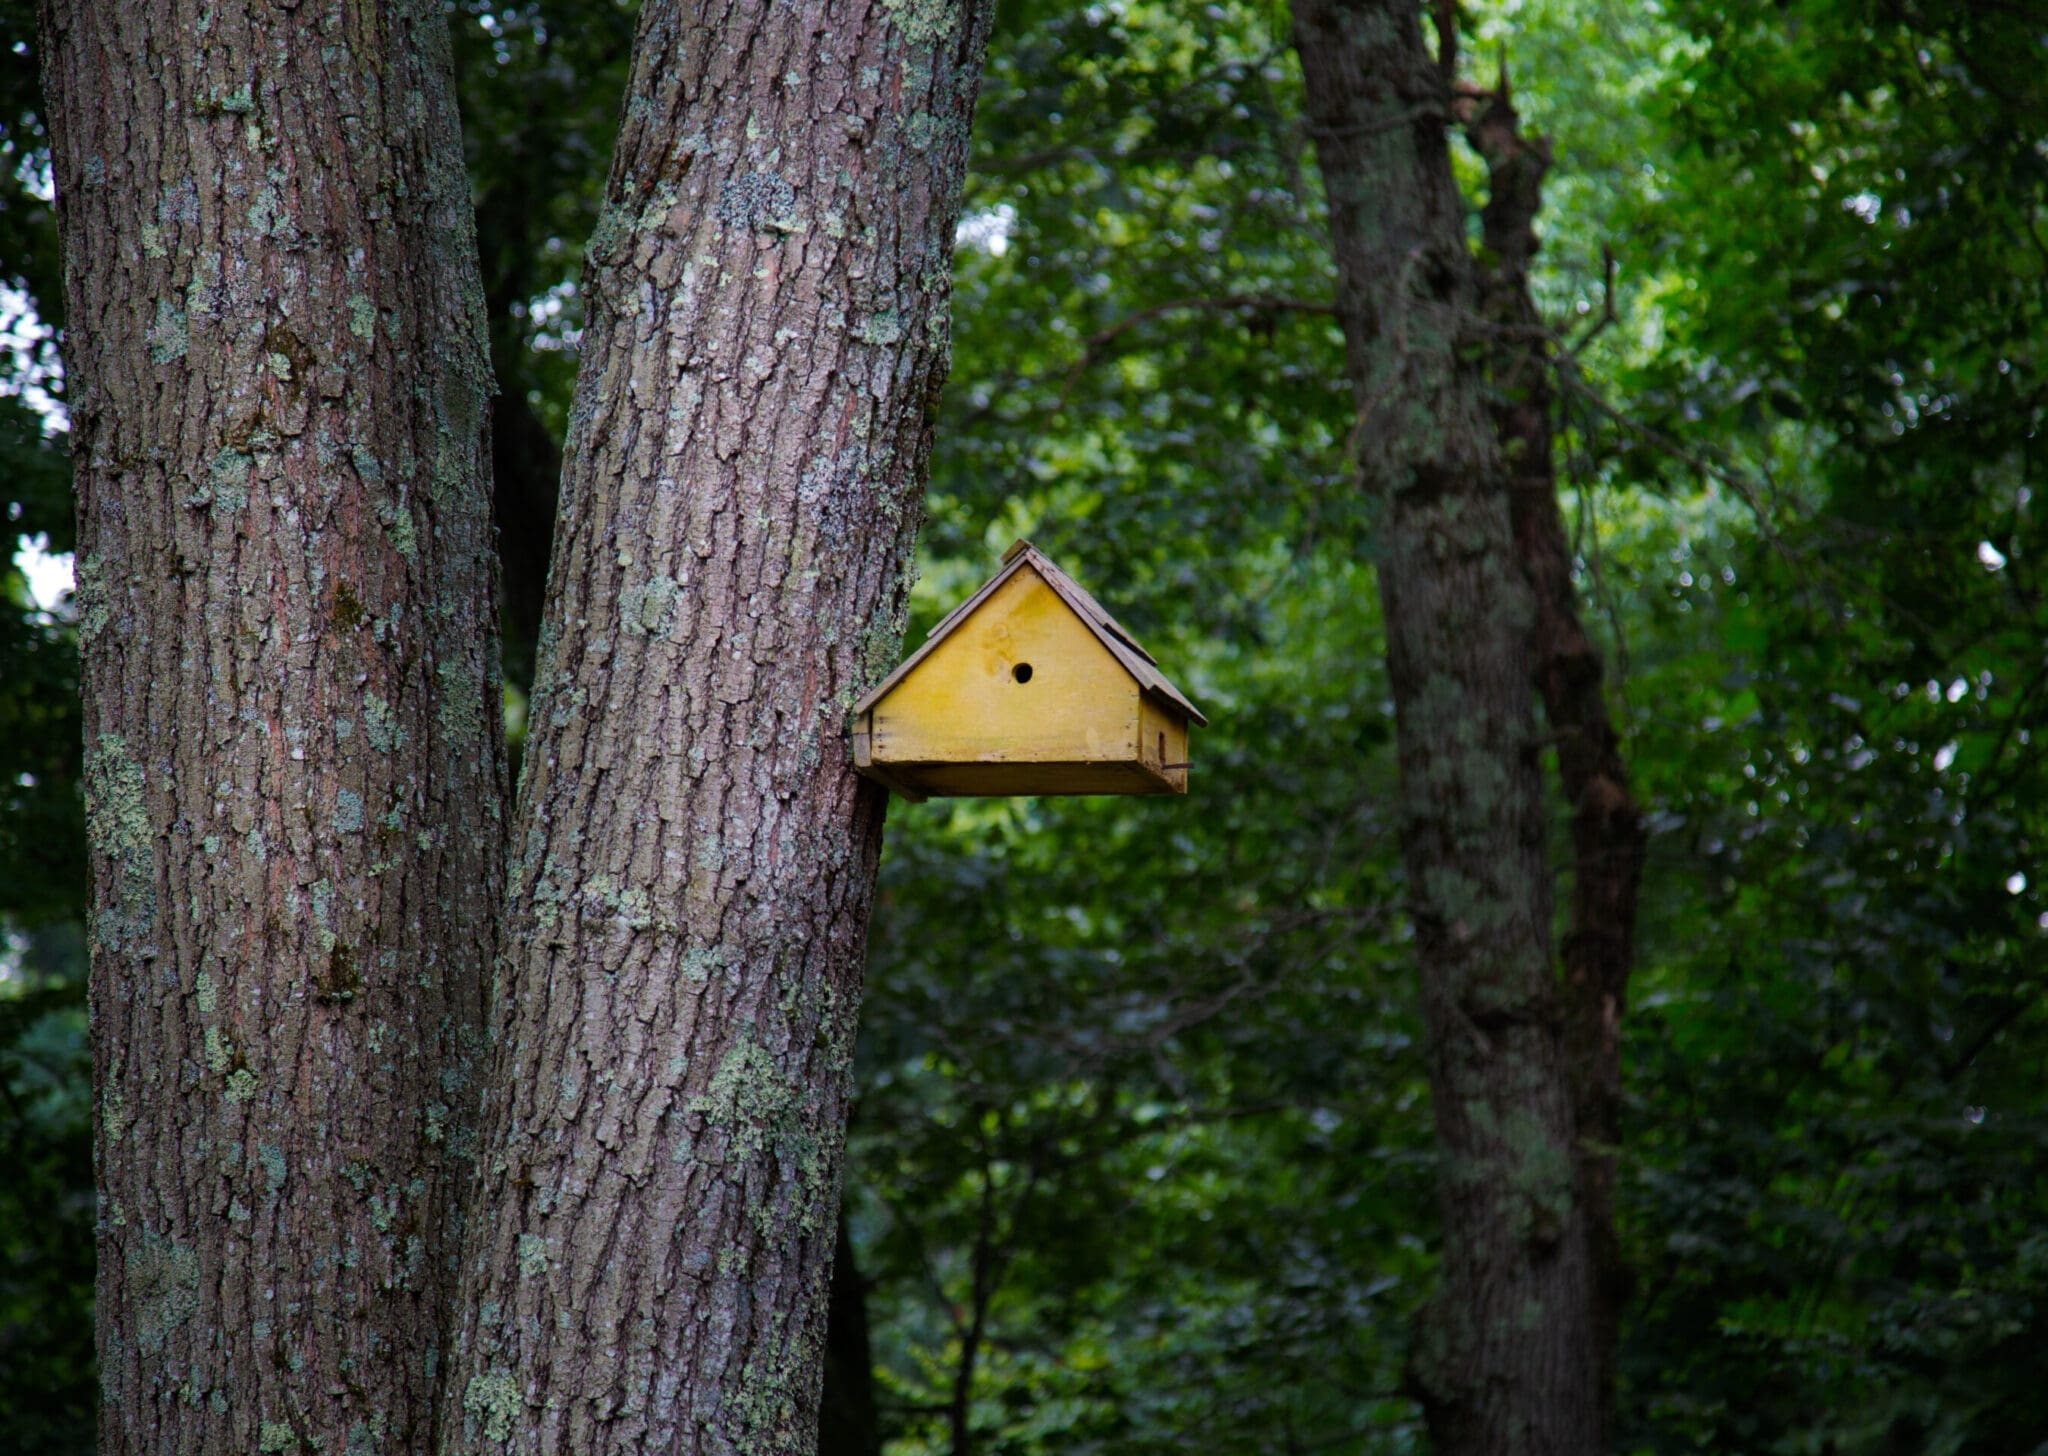 A photo of a yellow wooden birdhouse attached to a large, mossy oak tree.